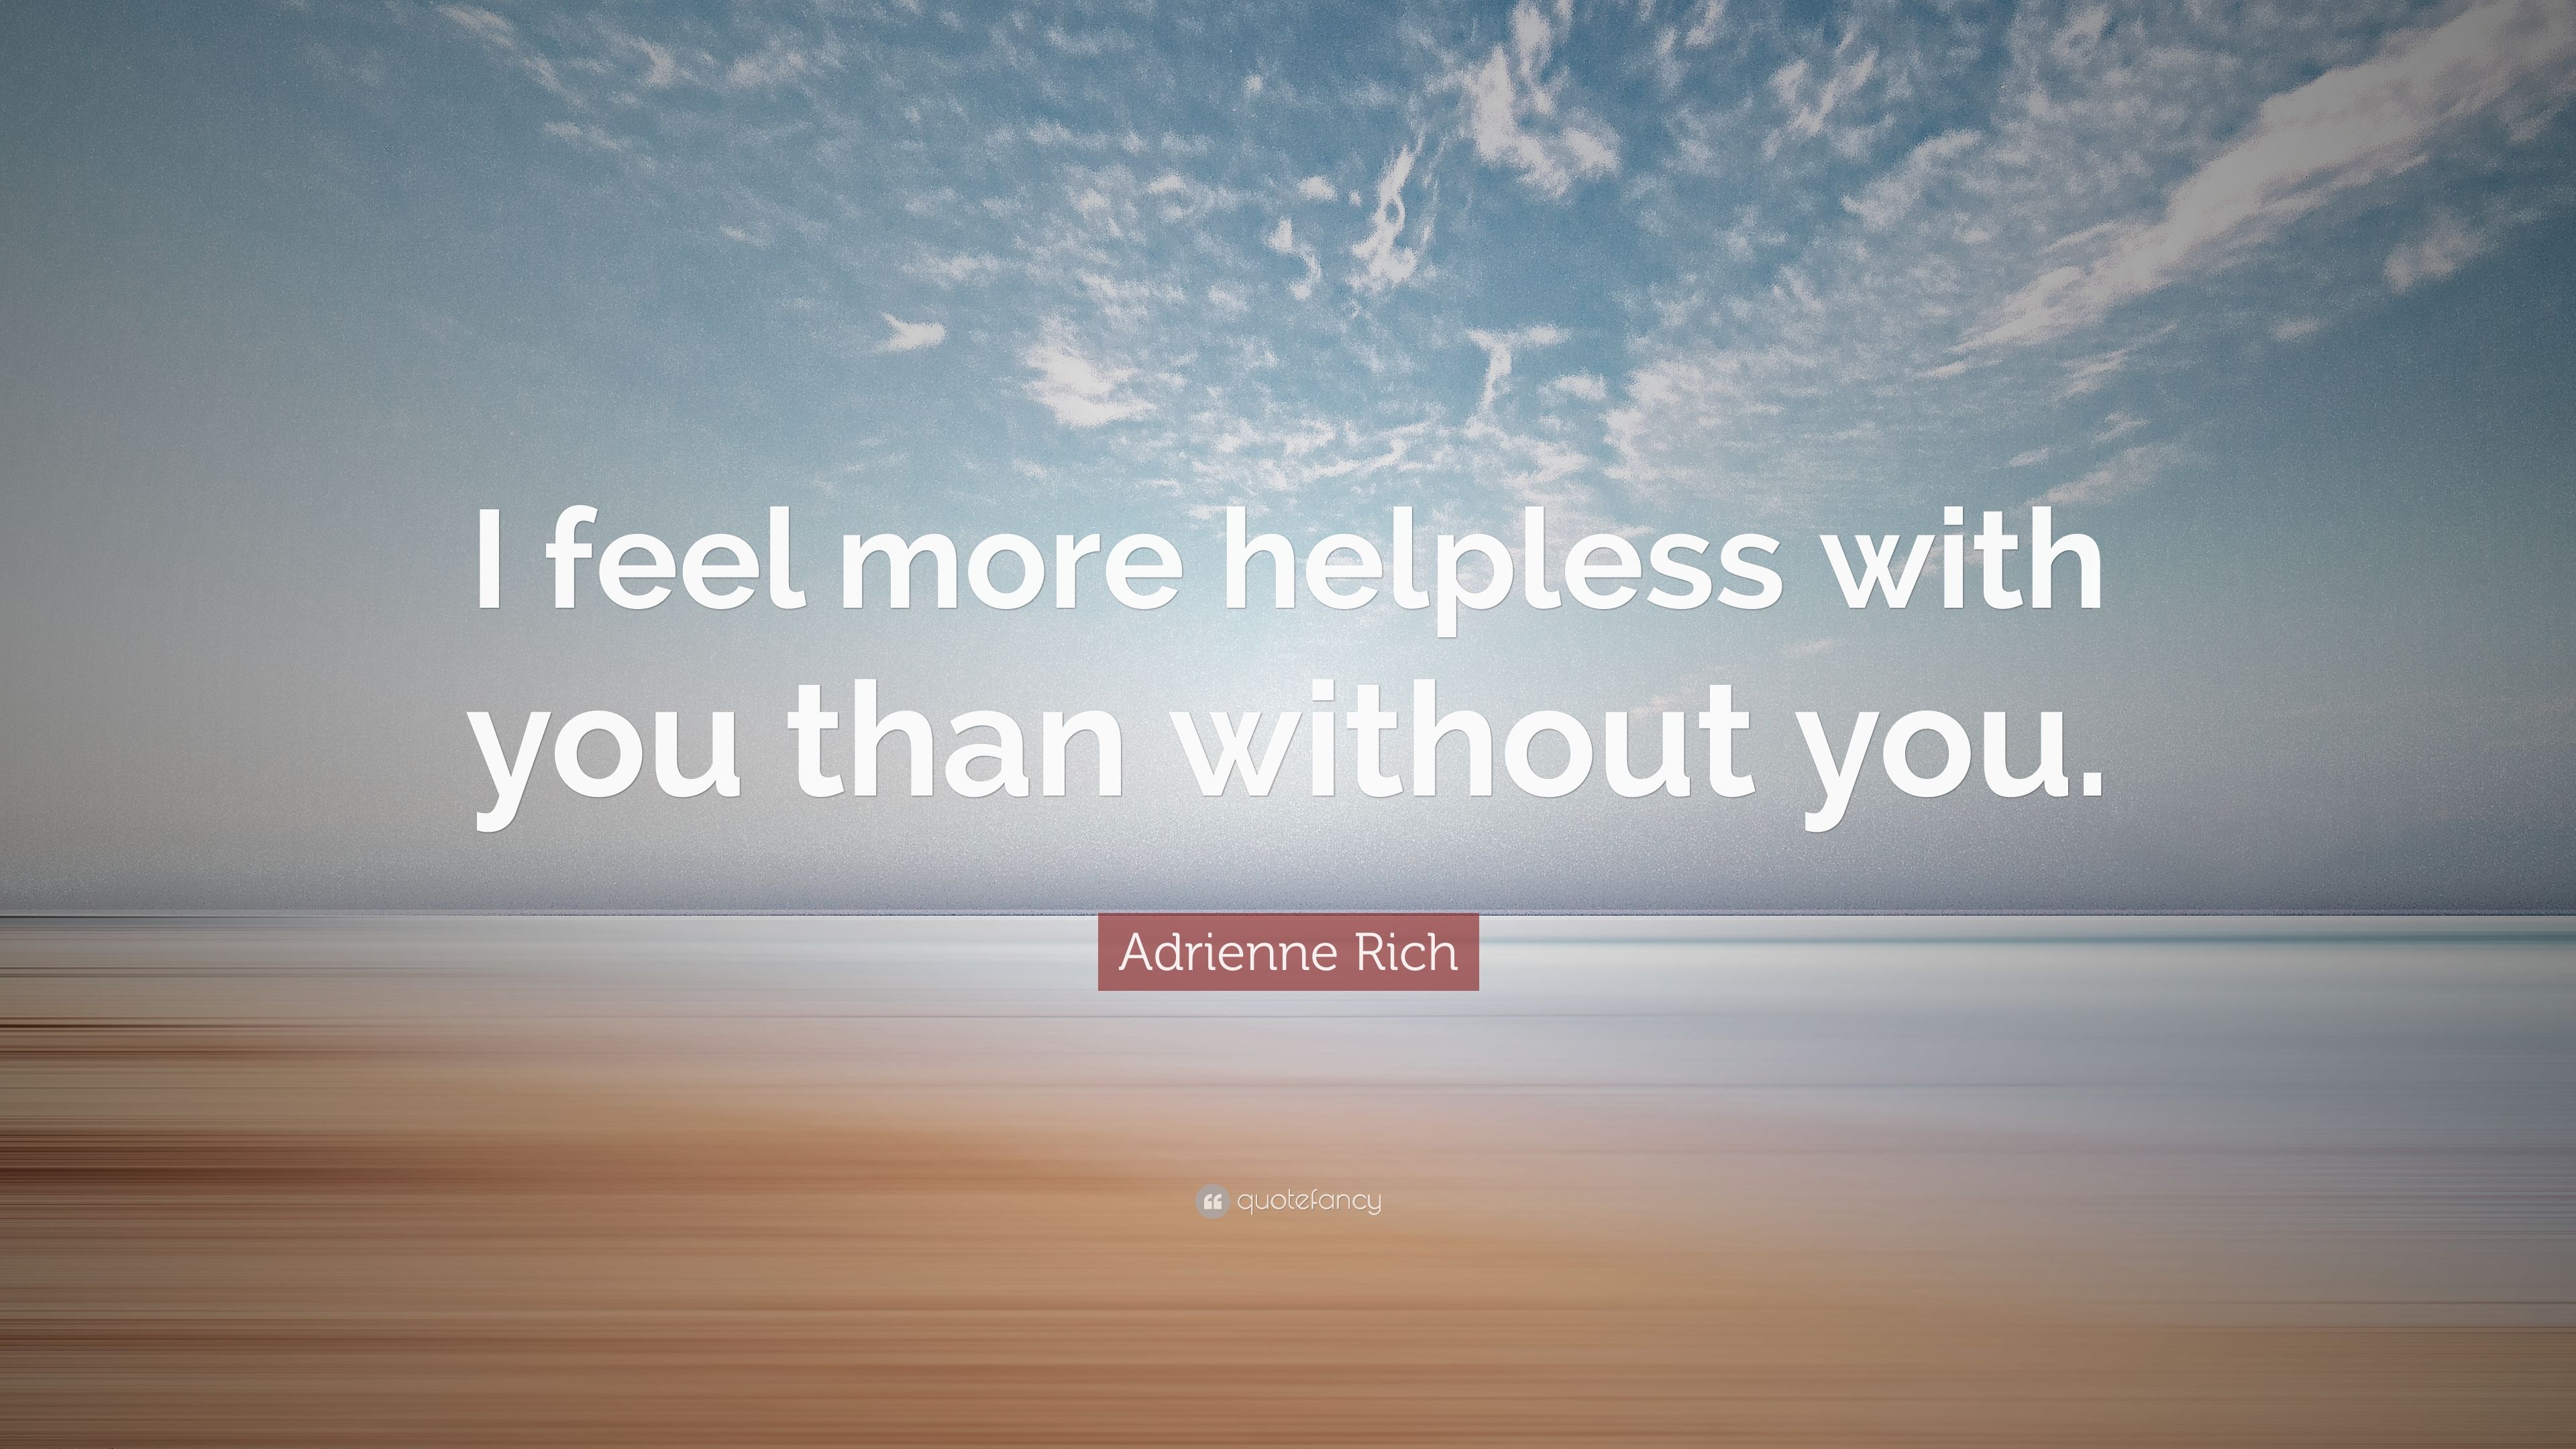 Adrienne Rich Quote: “I feel more helpless with you than without you.” (6 wallpaper)